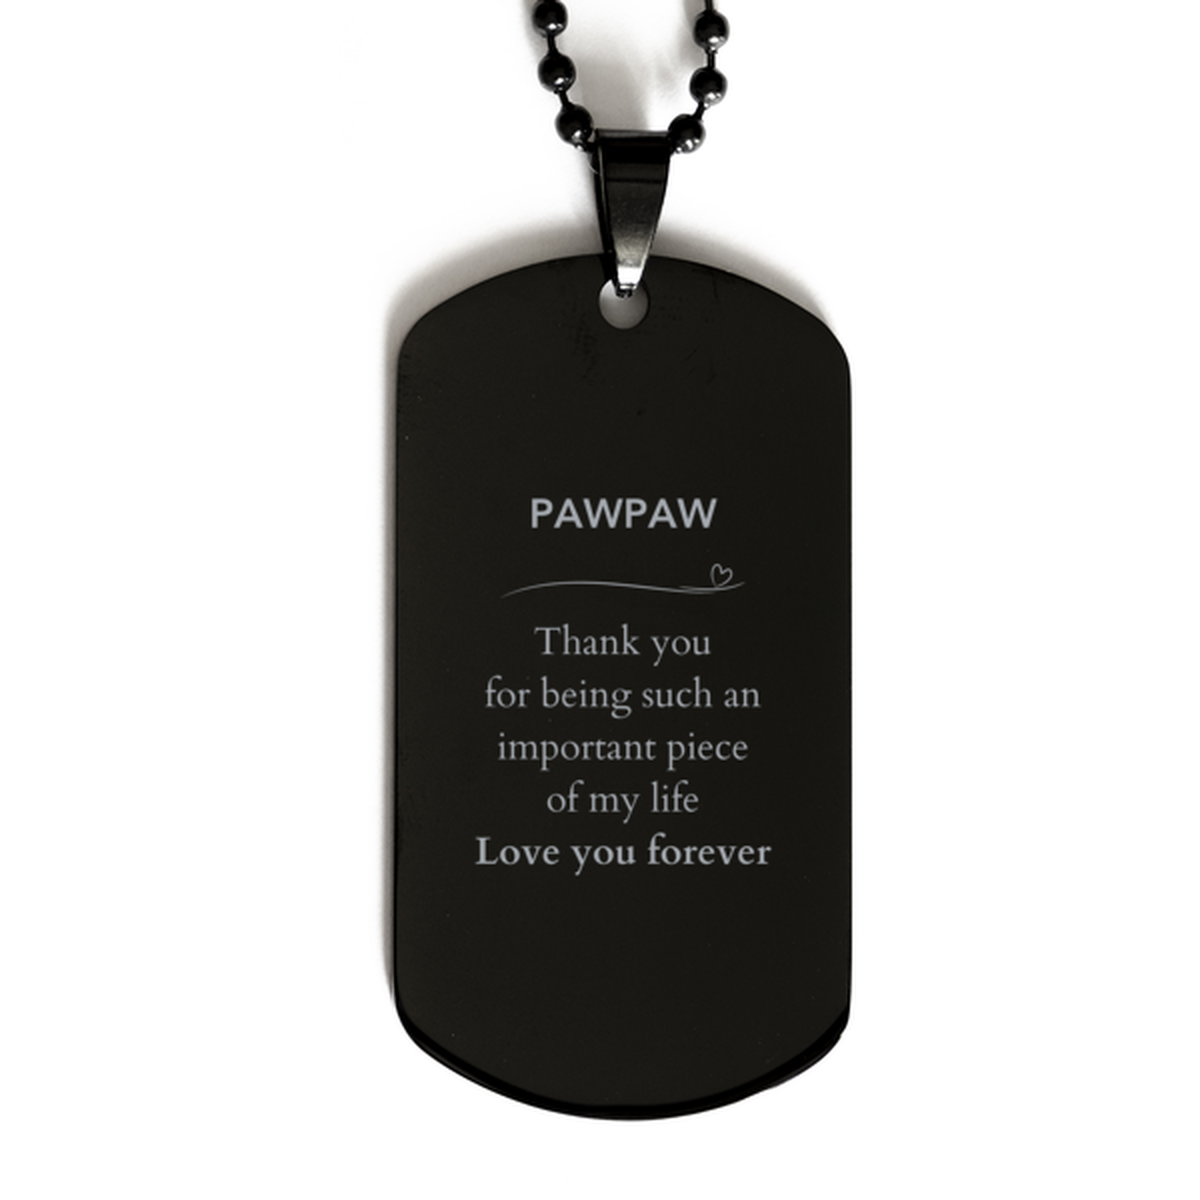 Appropriate Pawpaw Black Dog Tag Epic Birthday Gifts for Pawpaw Thank you for being such an important piece of my life Pawpaw Christmas Mothers Fathers Day